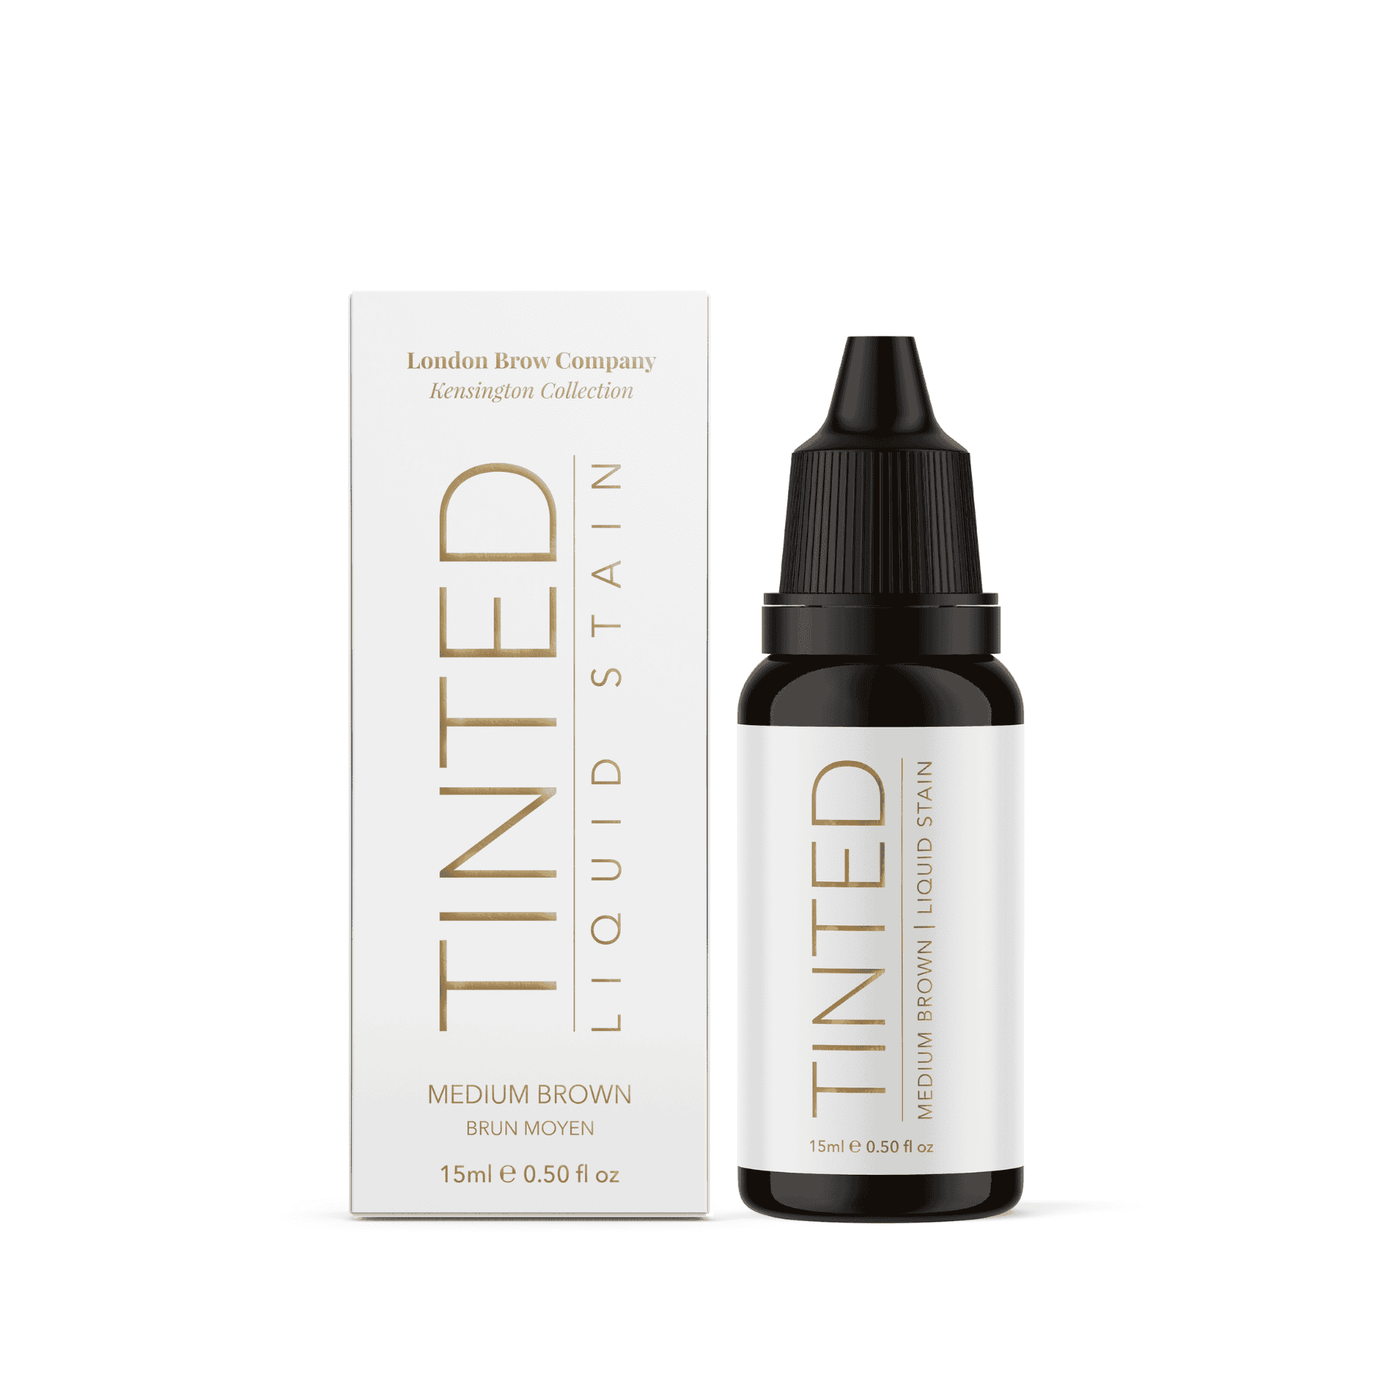 TINTED Liquid Stain Tint Bottle - 15ml - The London Brow Company